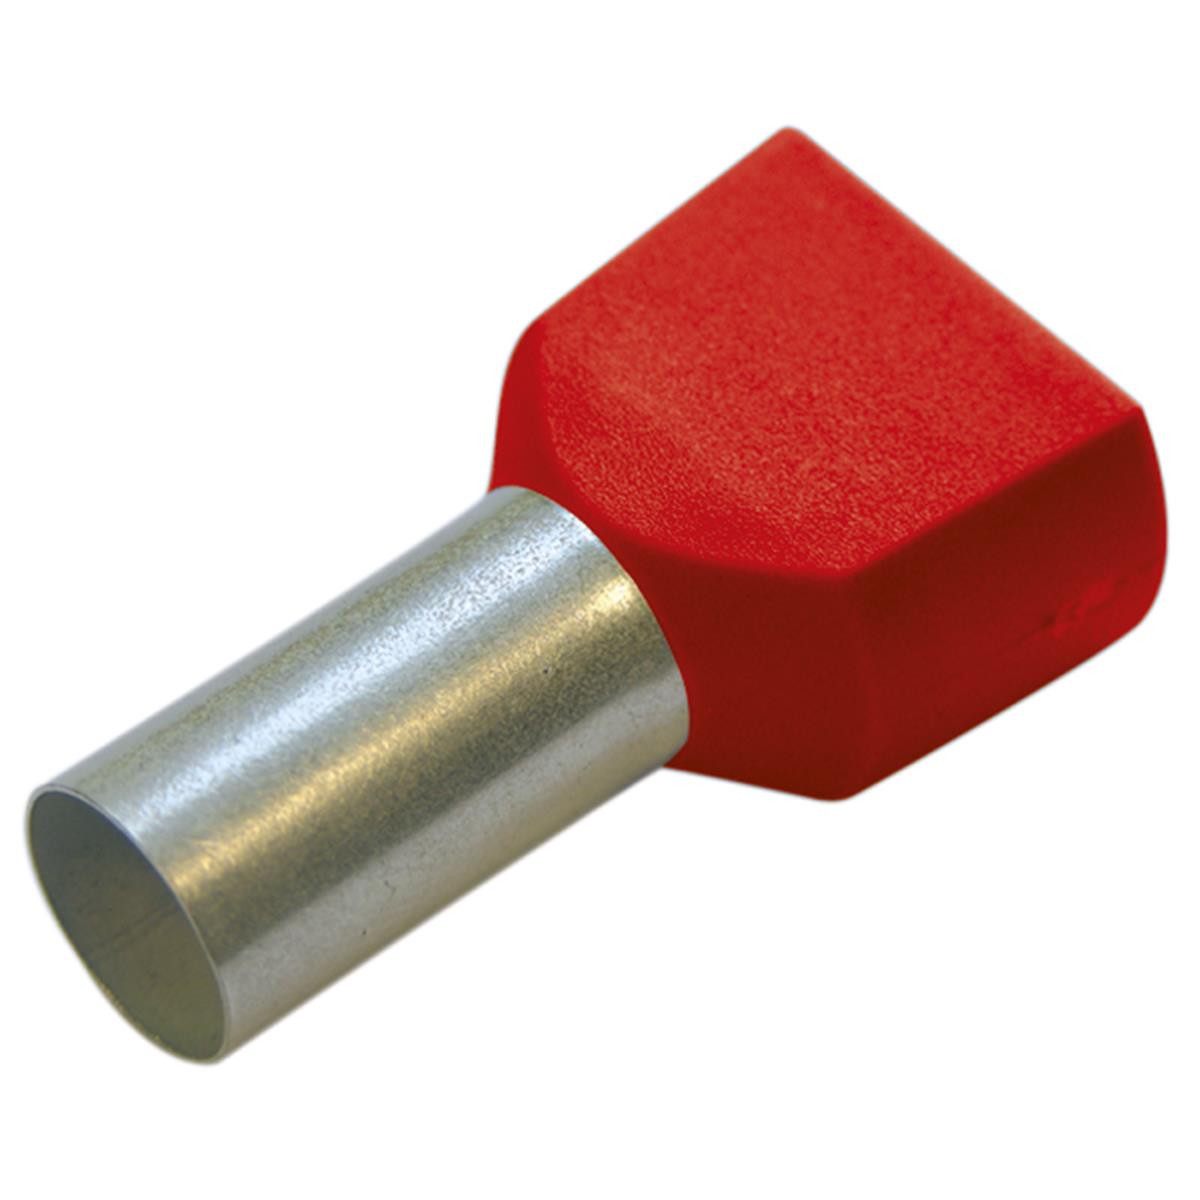 Adereindhuls dubbel 10mm² (Rood)